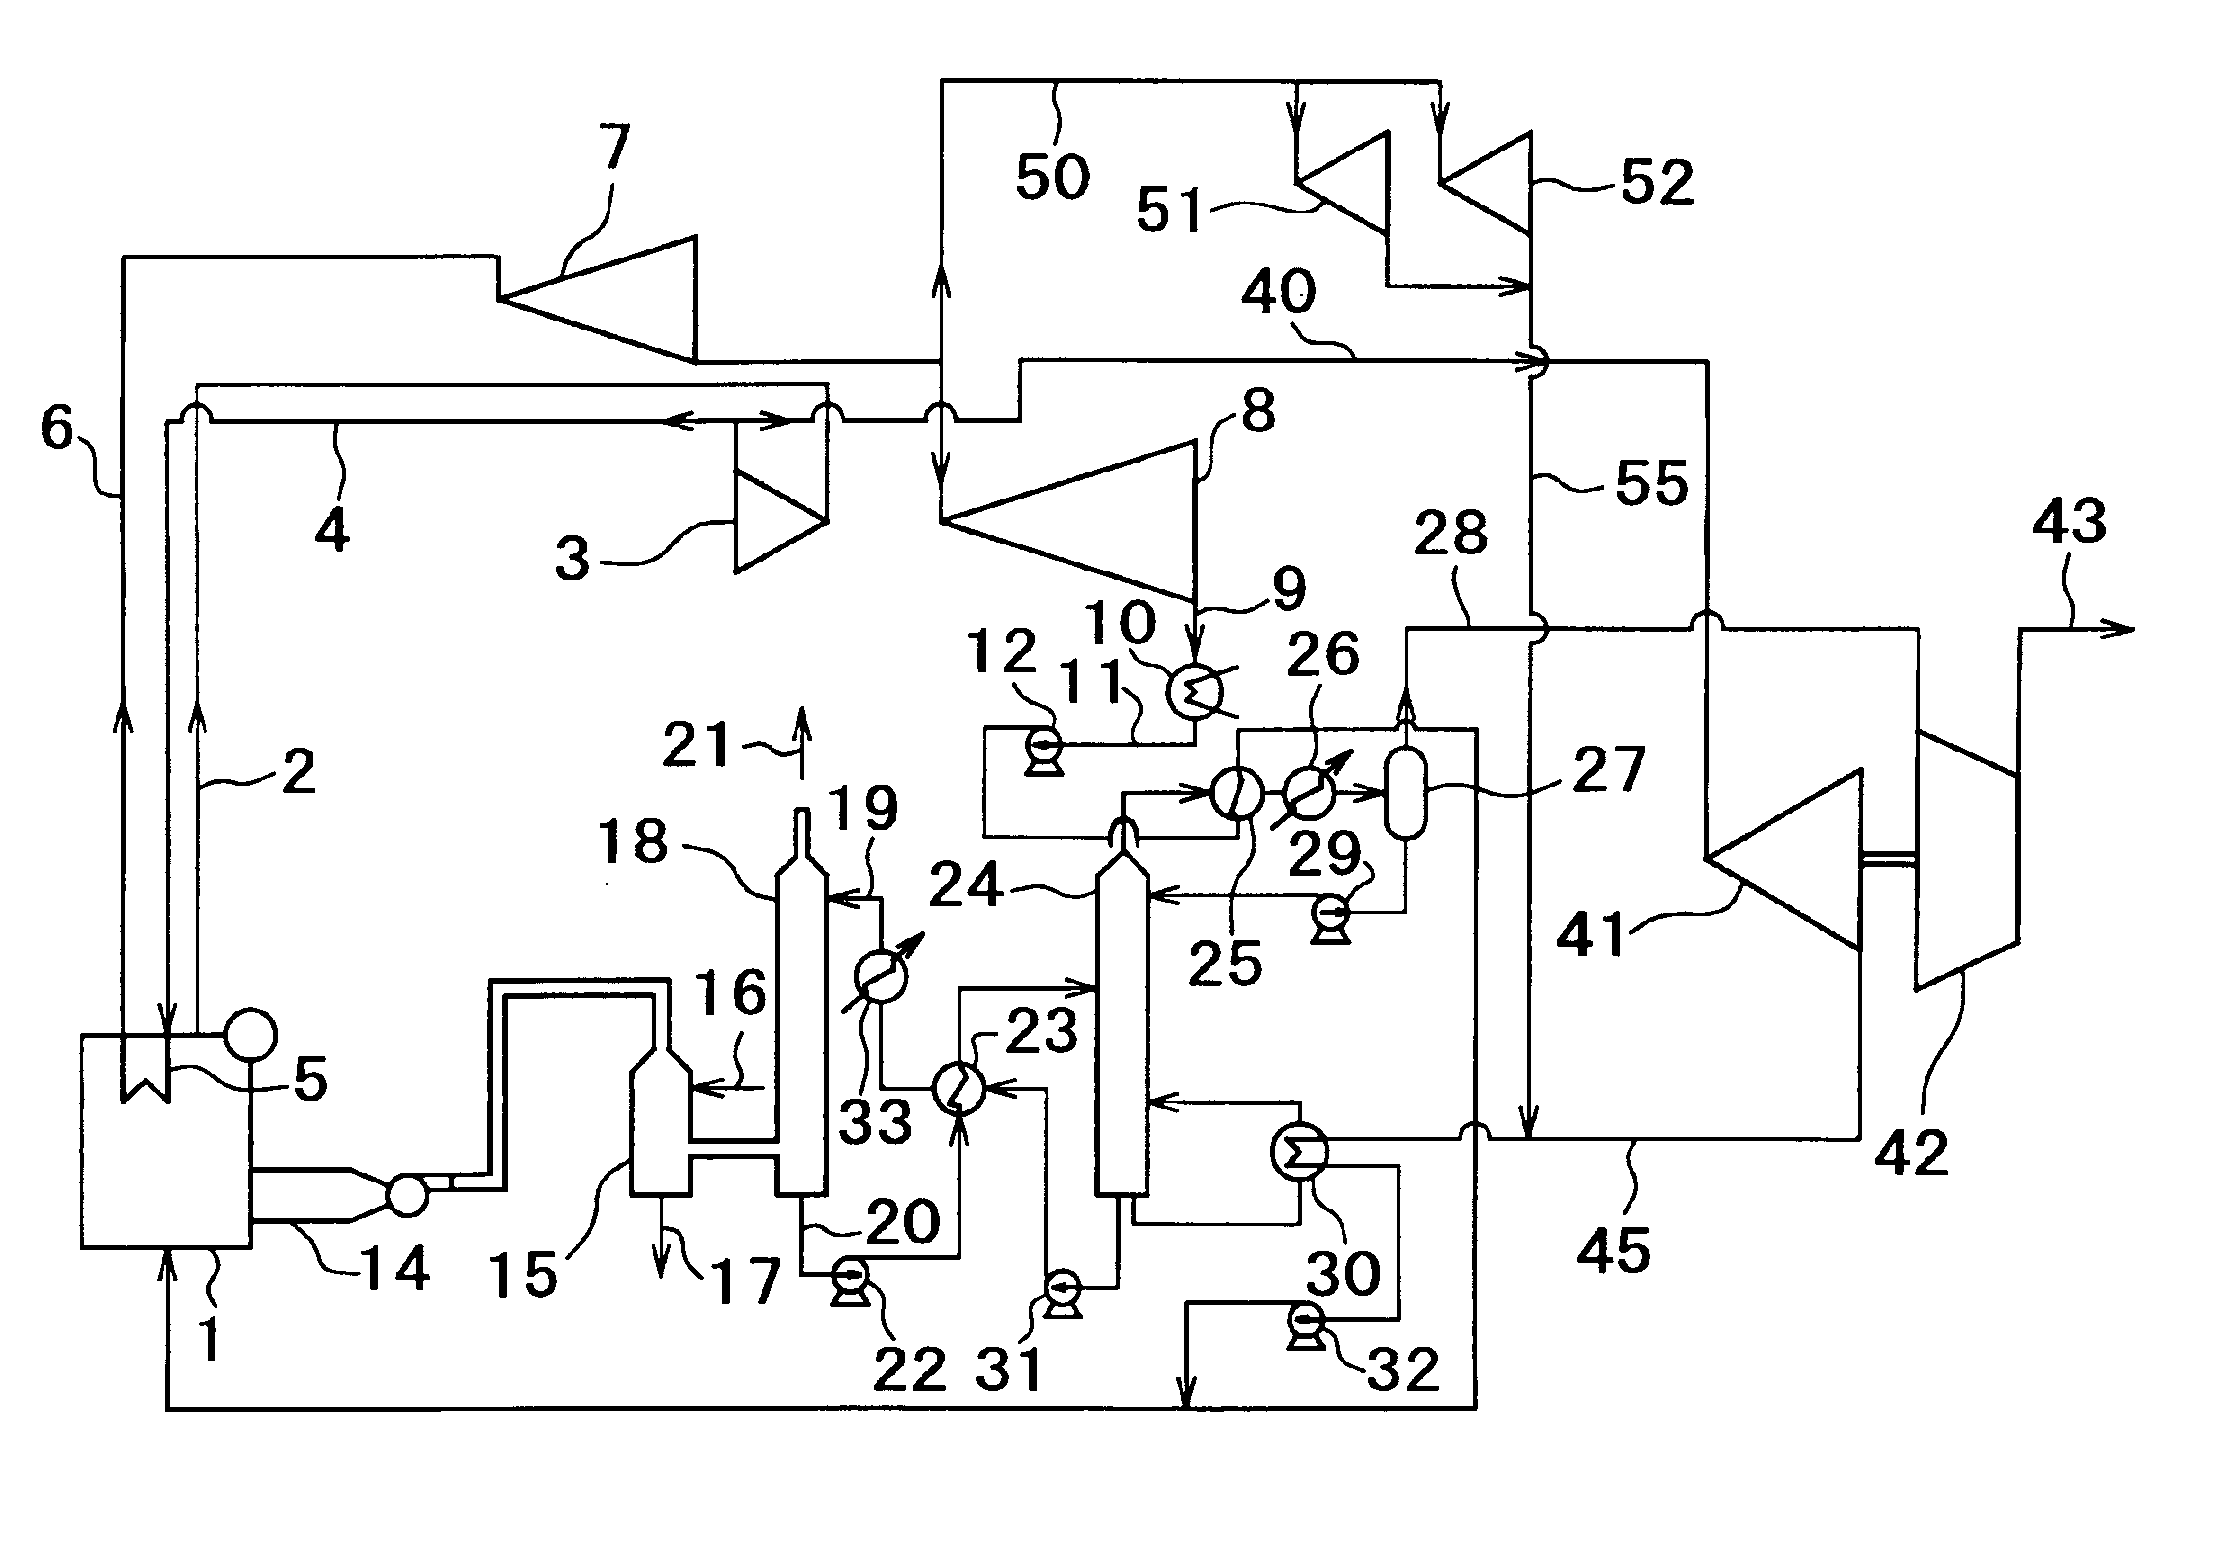 Method and system for recovering carbon dioxide